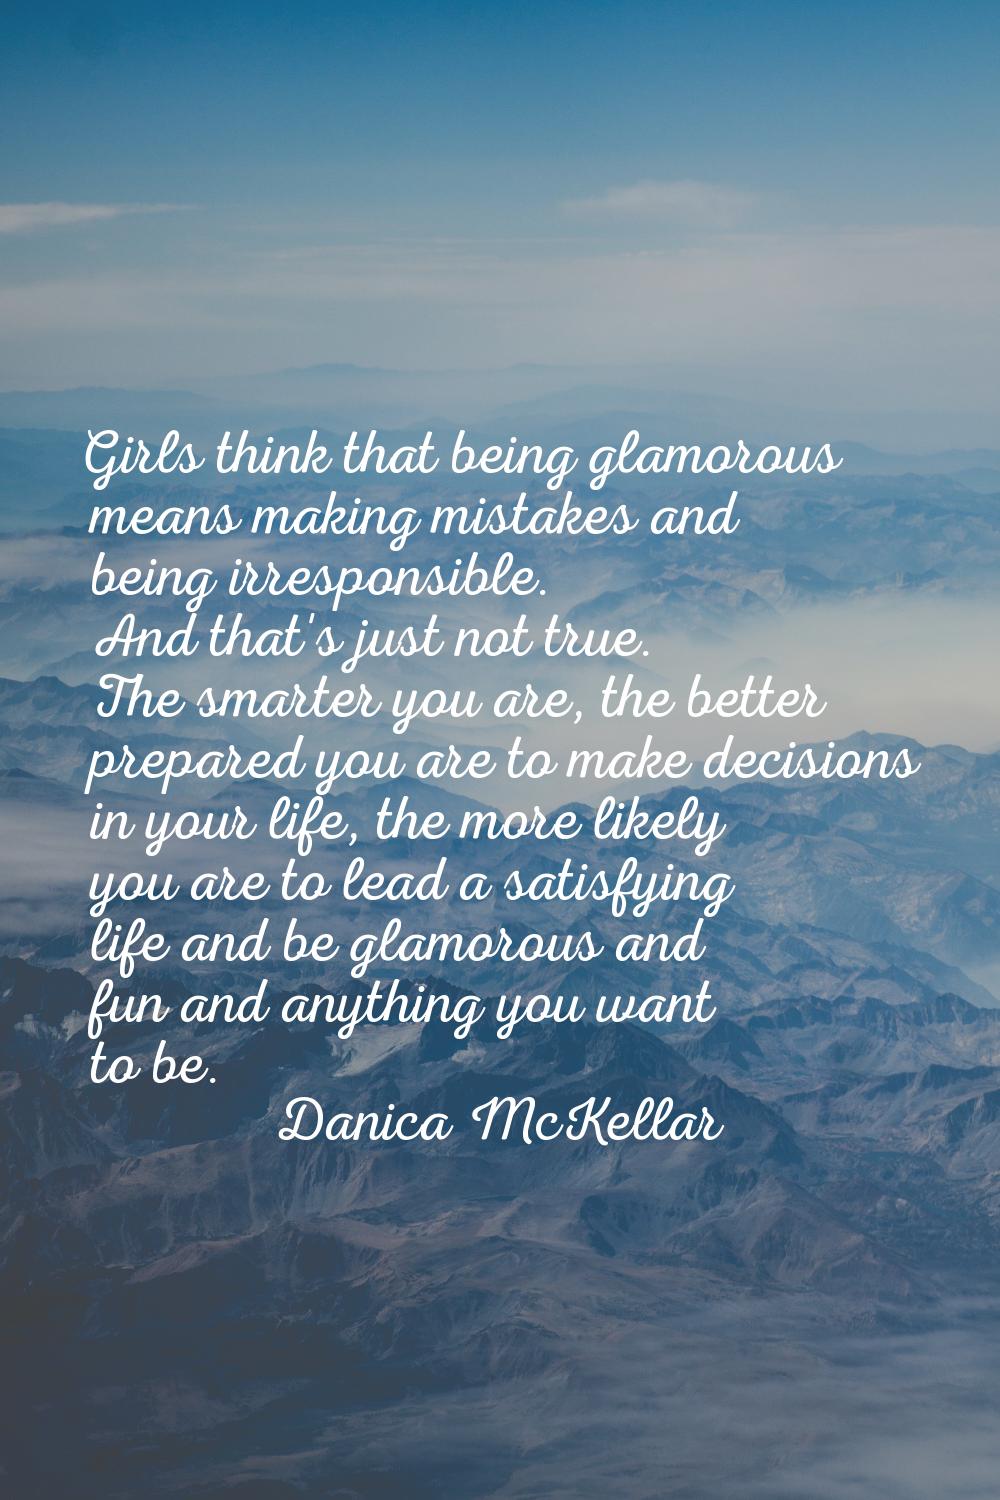 Girls think that being glamorous means making mistakes and being irresponsible. And that's just not